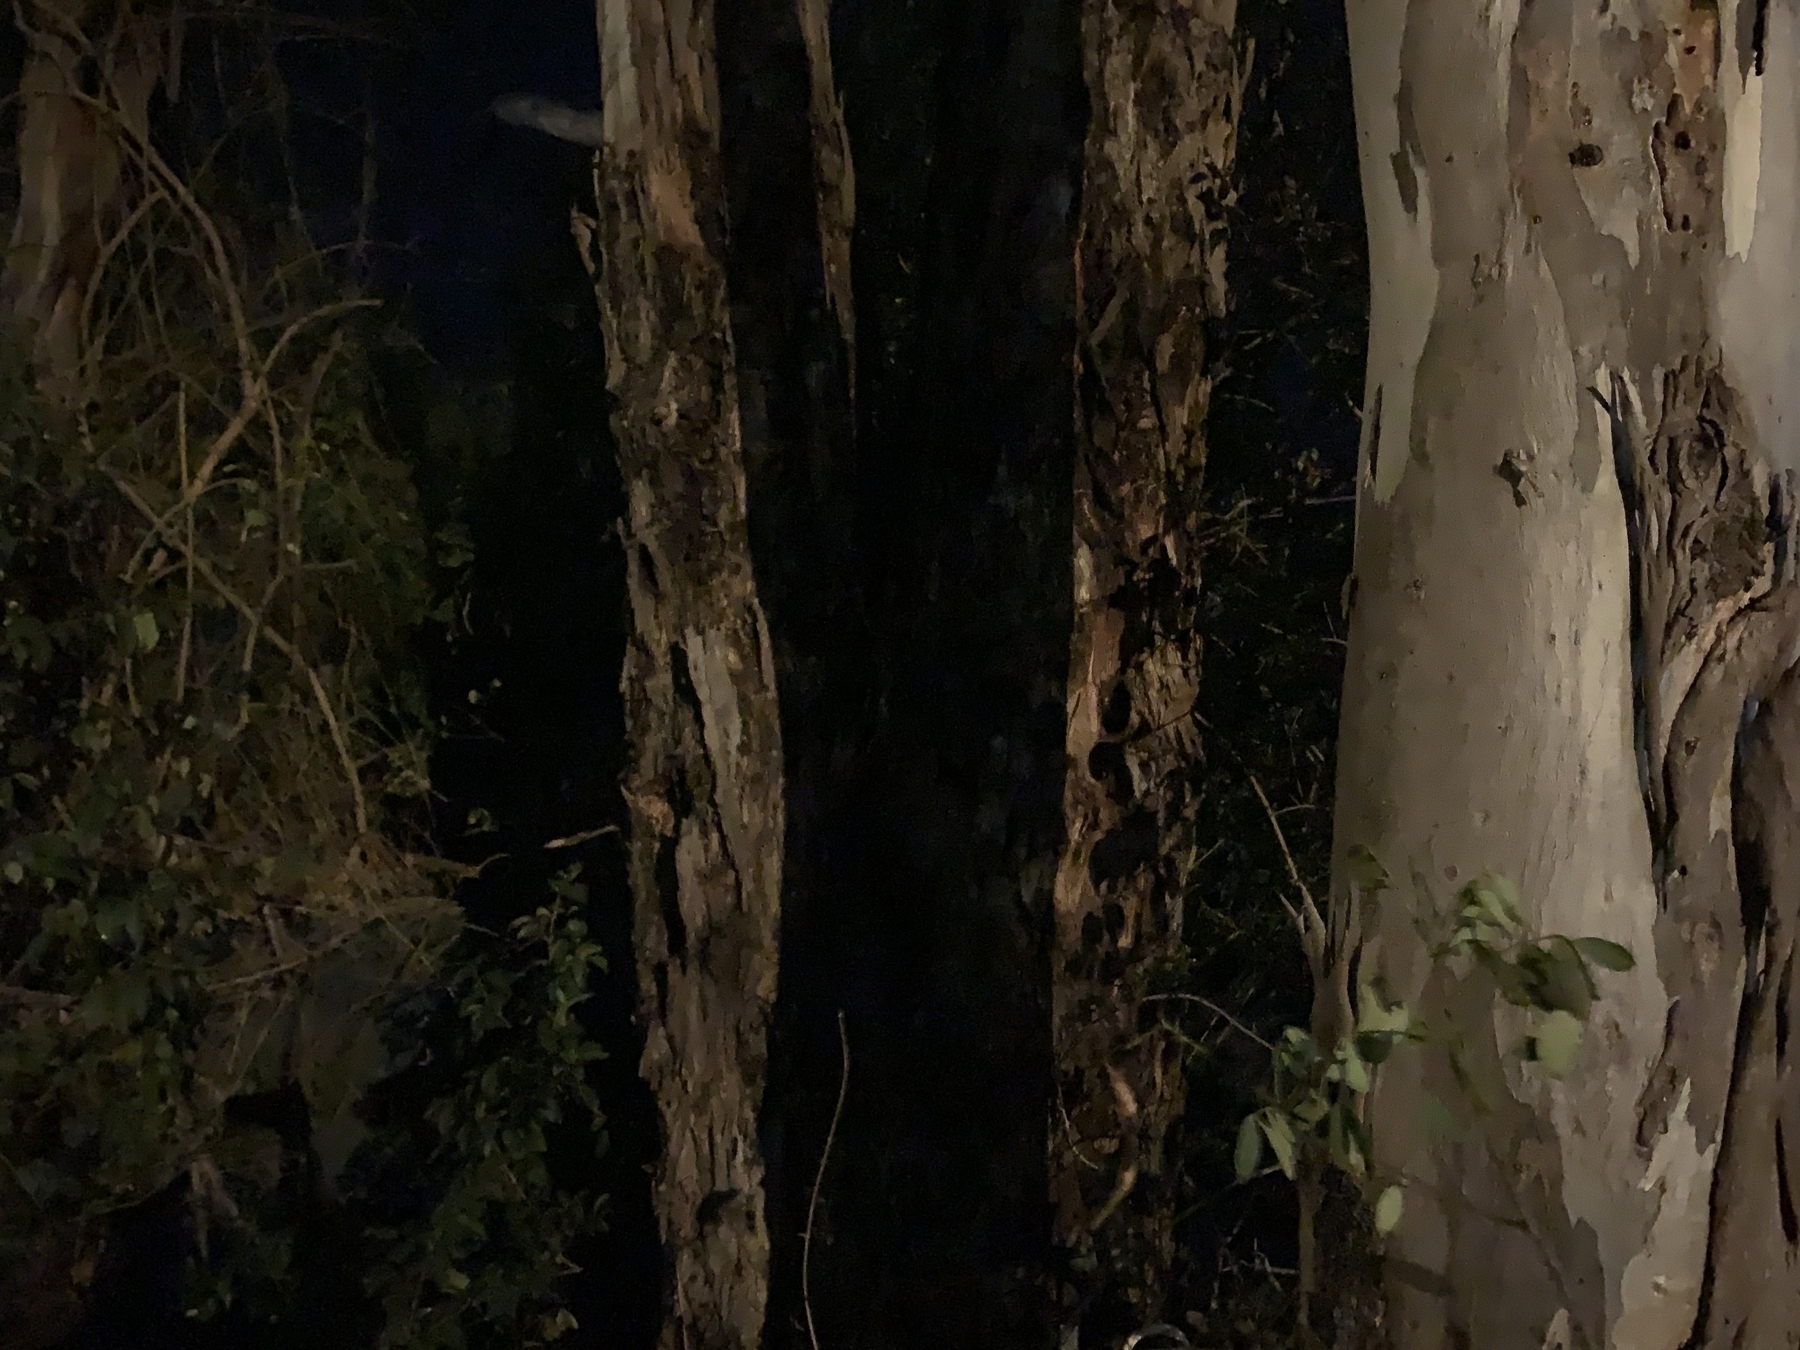 Eucalyptus trees at night with some other weeds and plant life around them